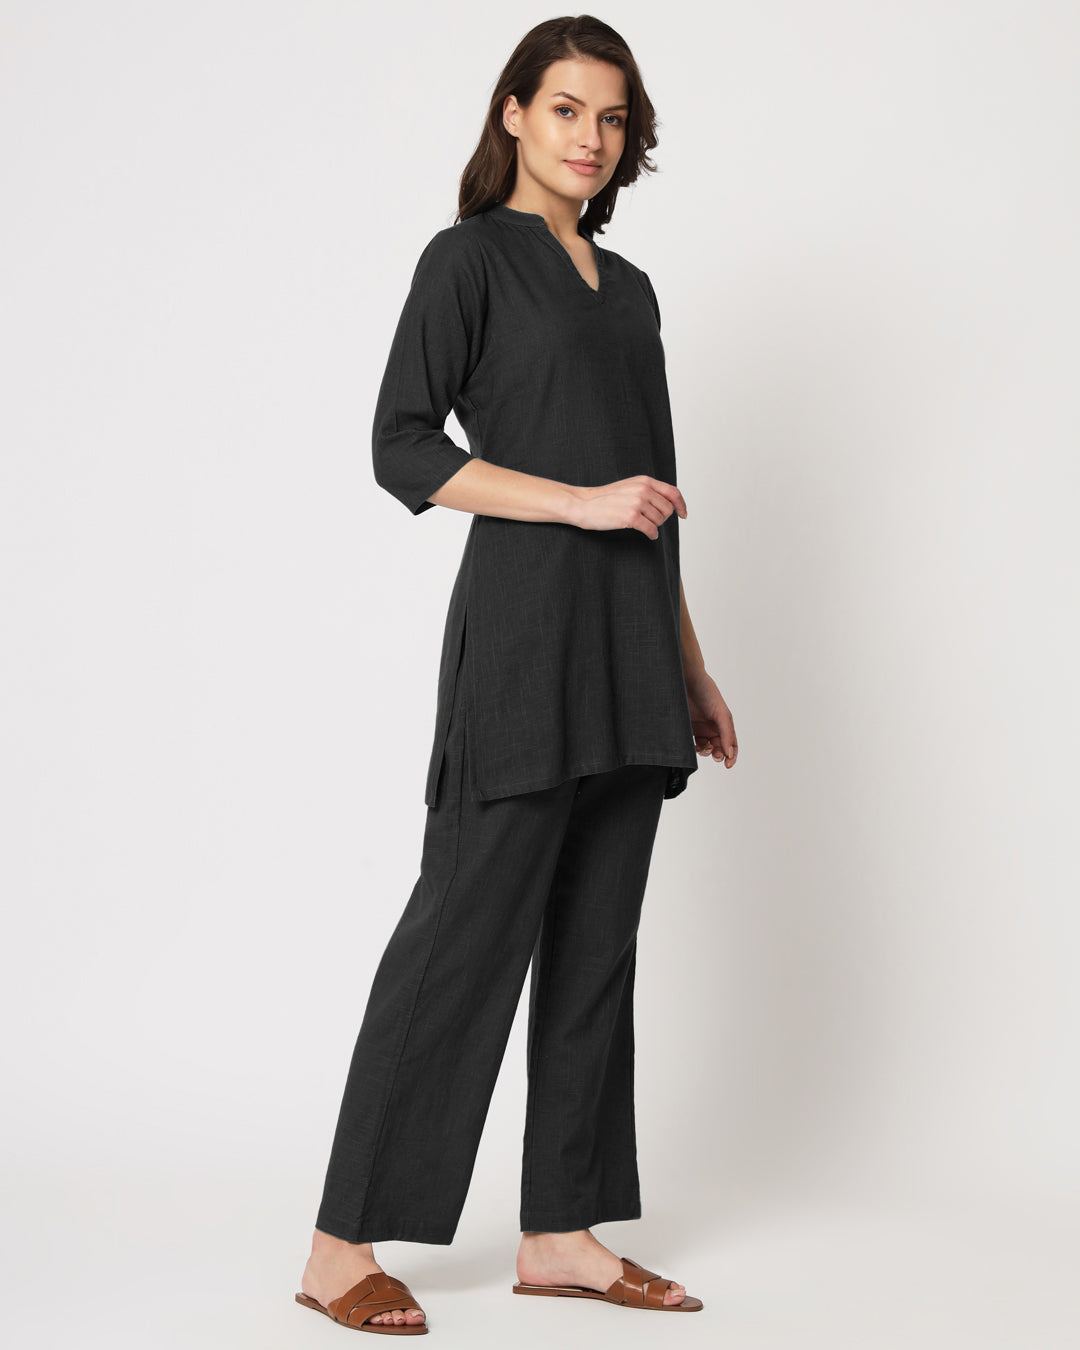 Classic Black Collar Neck Mid Length Solid Co-ord Set